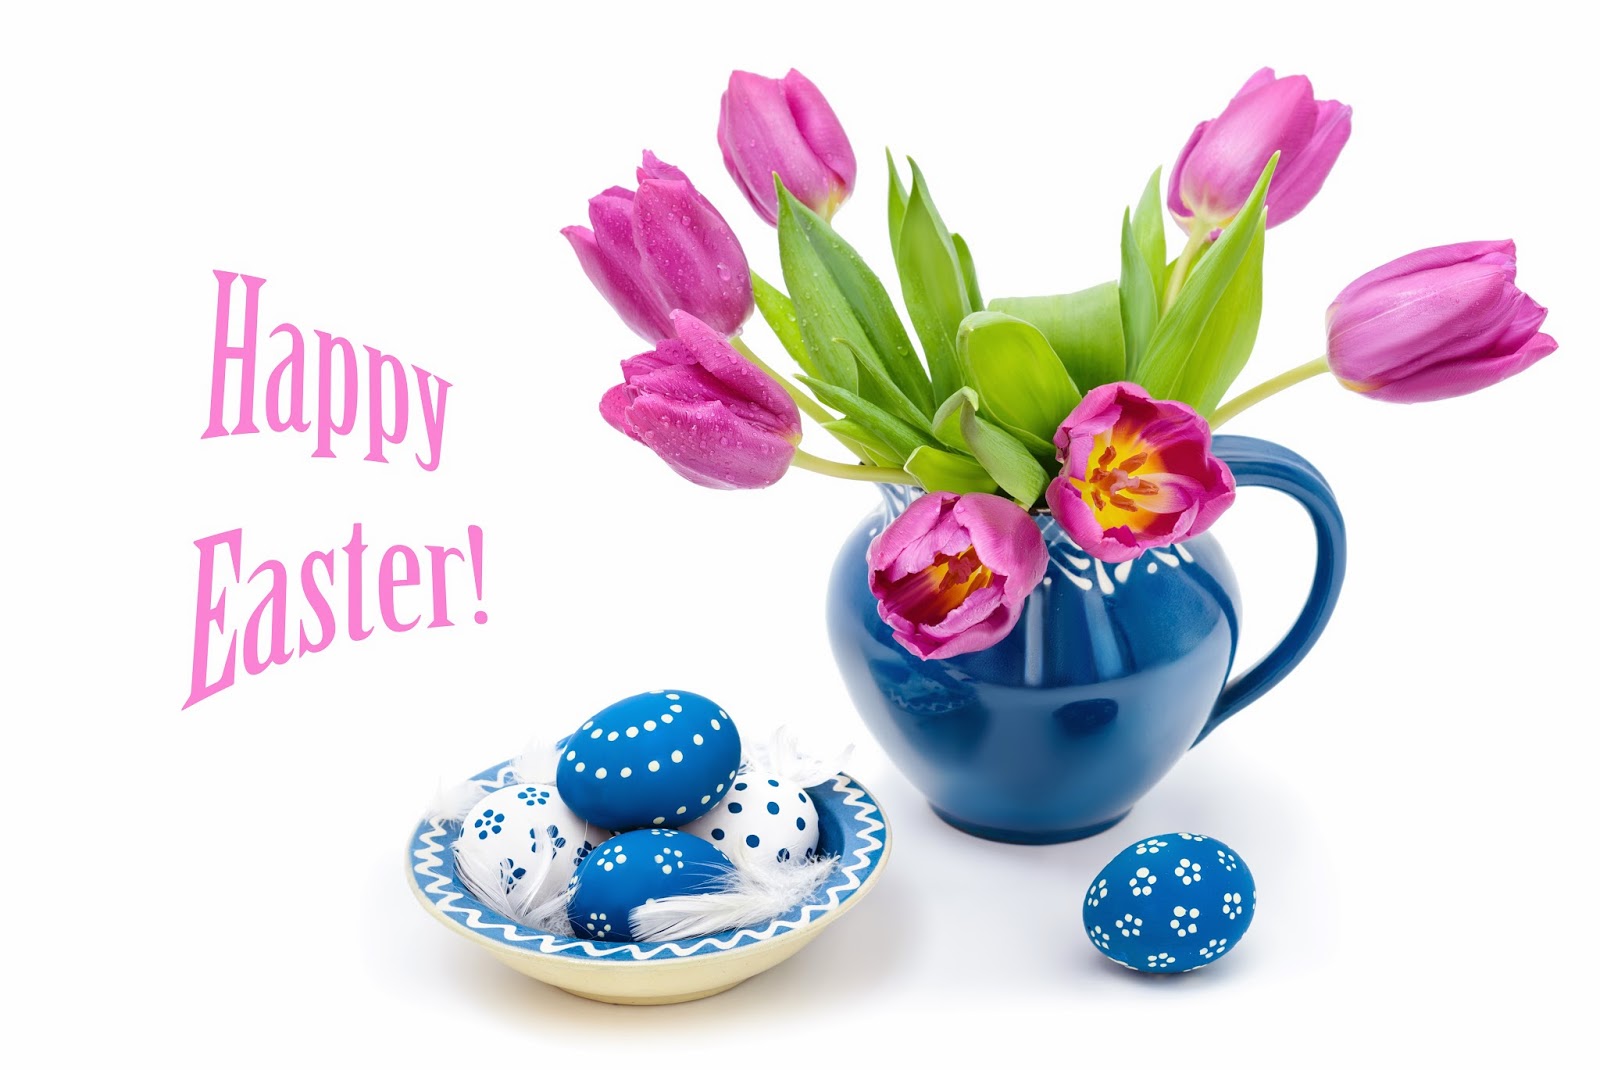 http://techuloid.com/wp-content/uploads/2015/04/Happy-Easter-2015-wallpapers.jpg